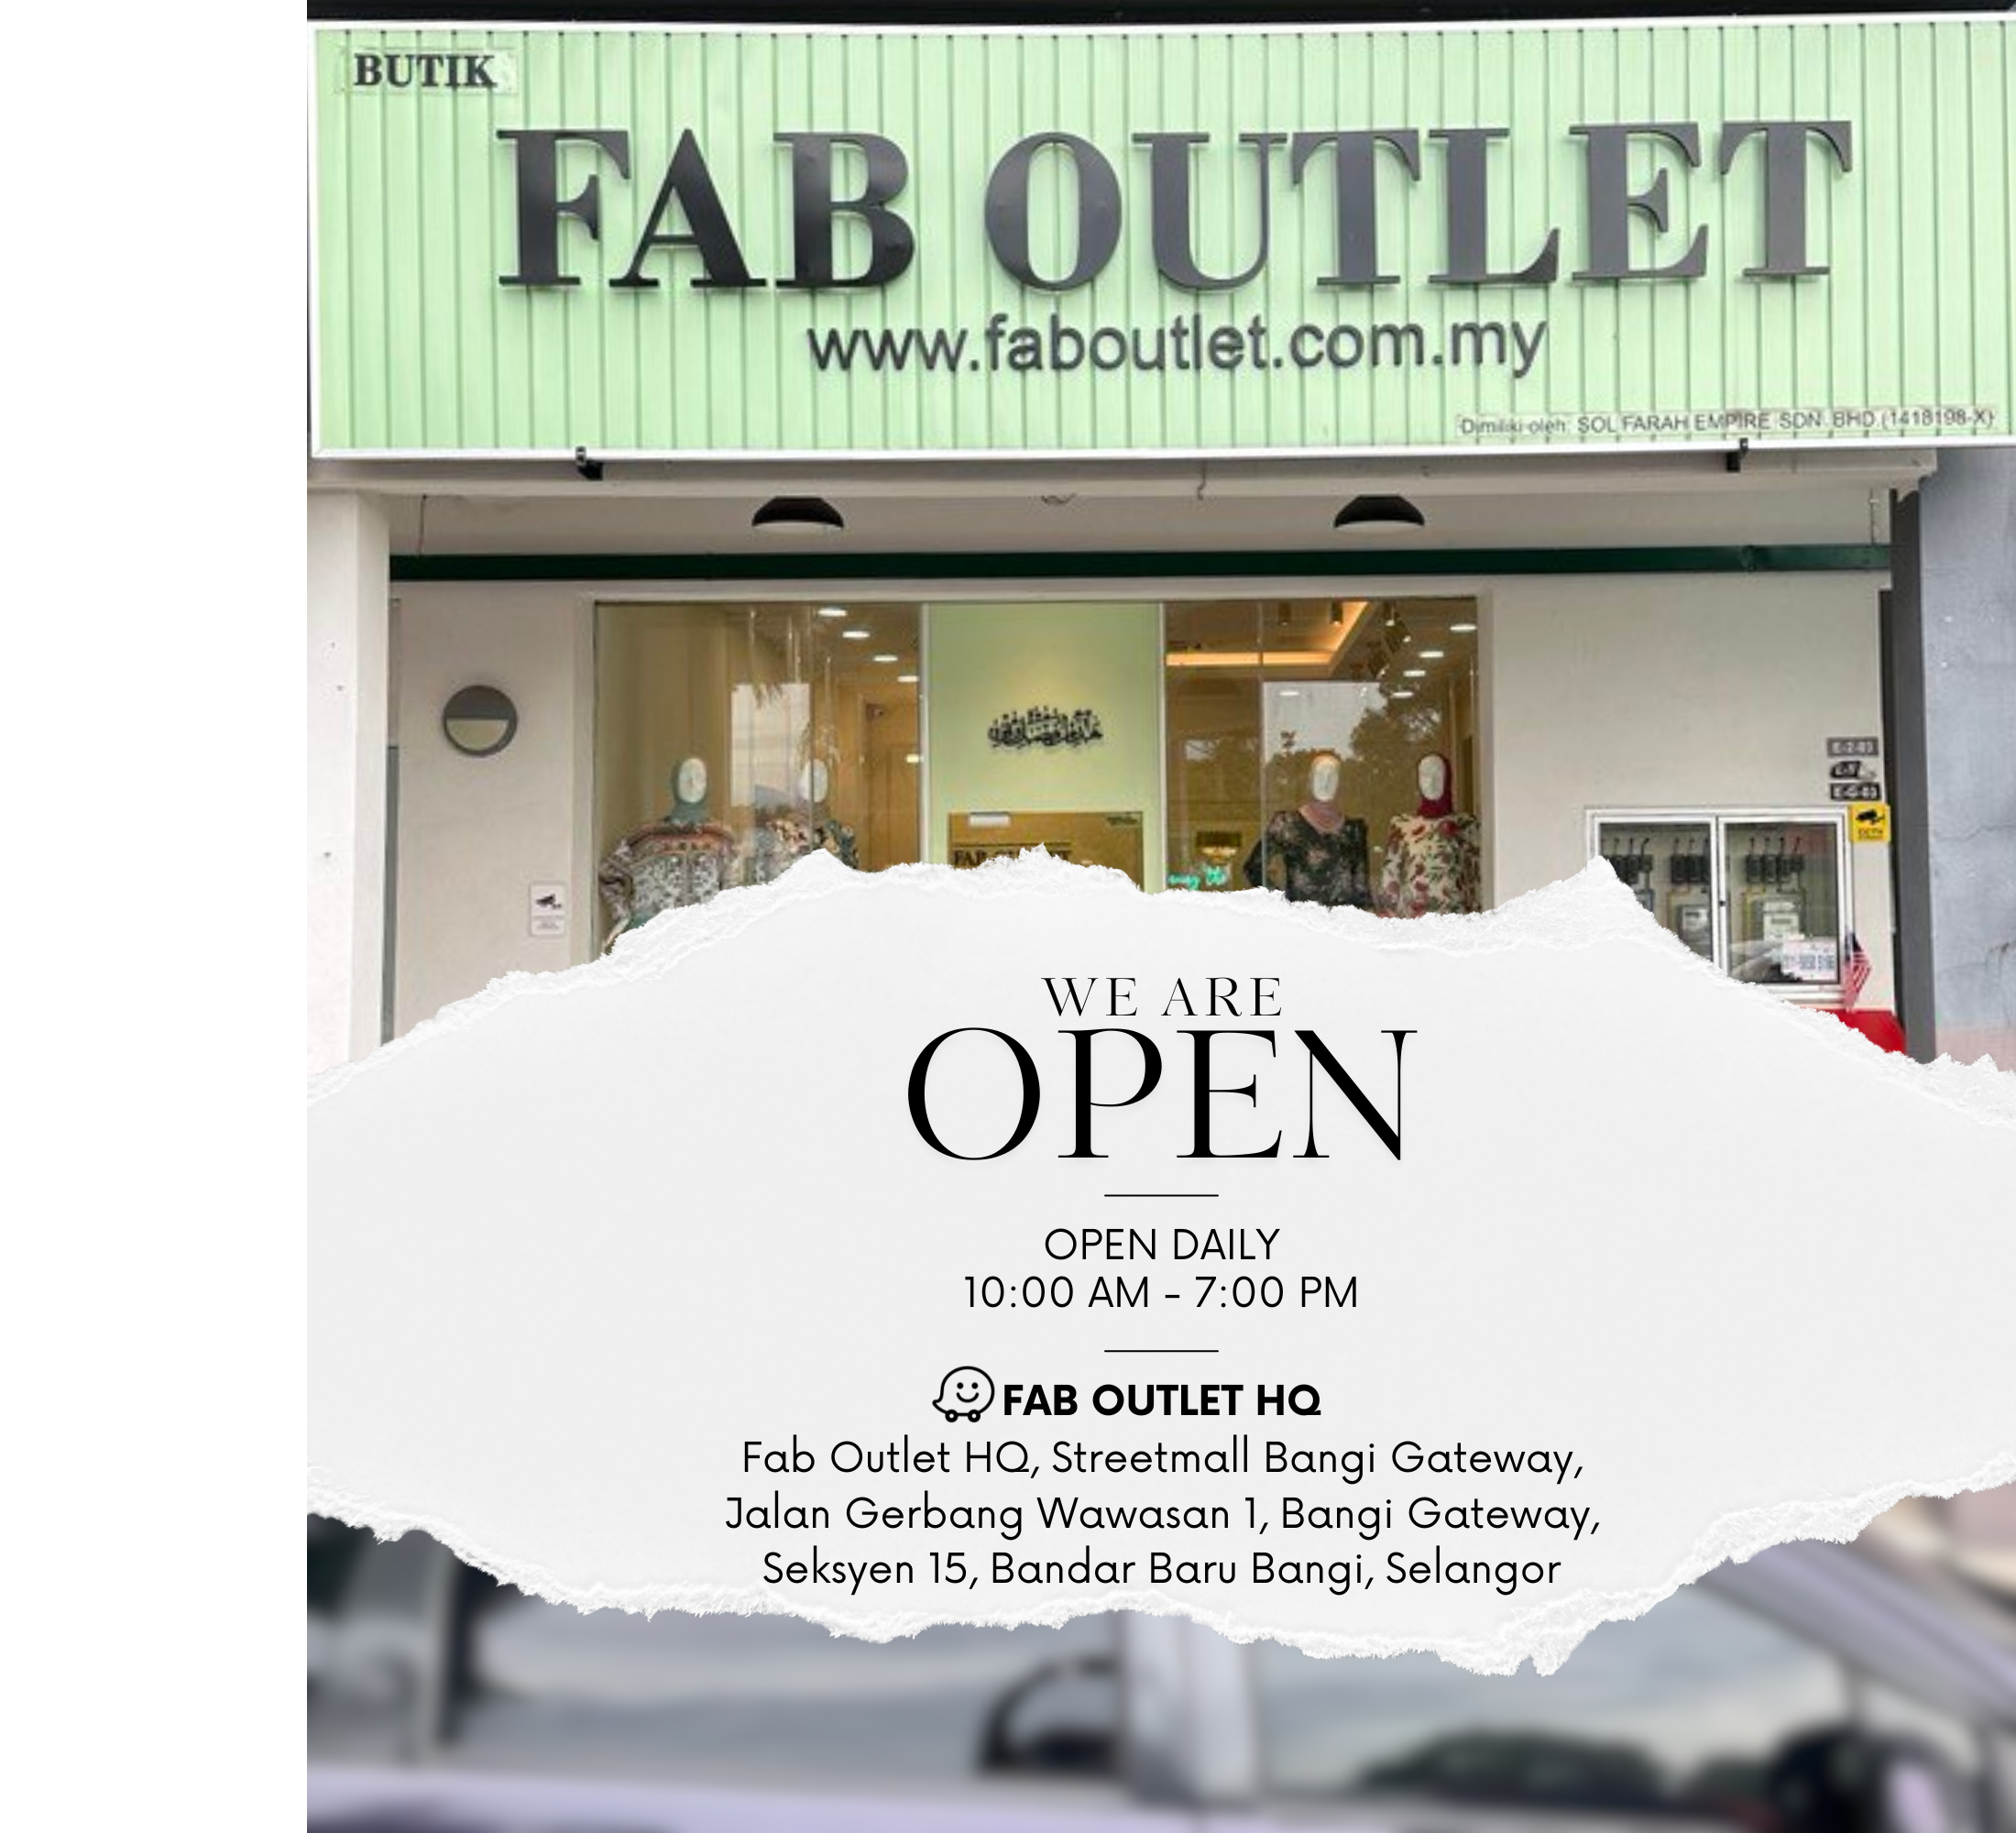 Fab Outlet HQ